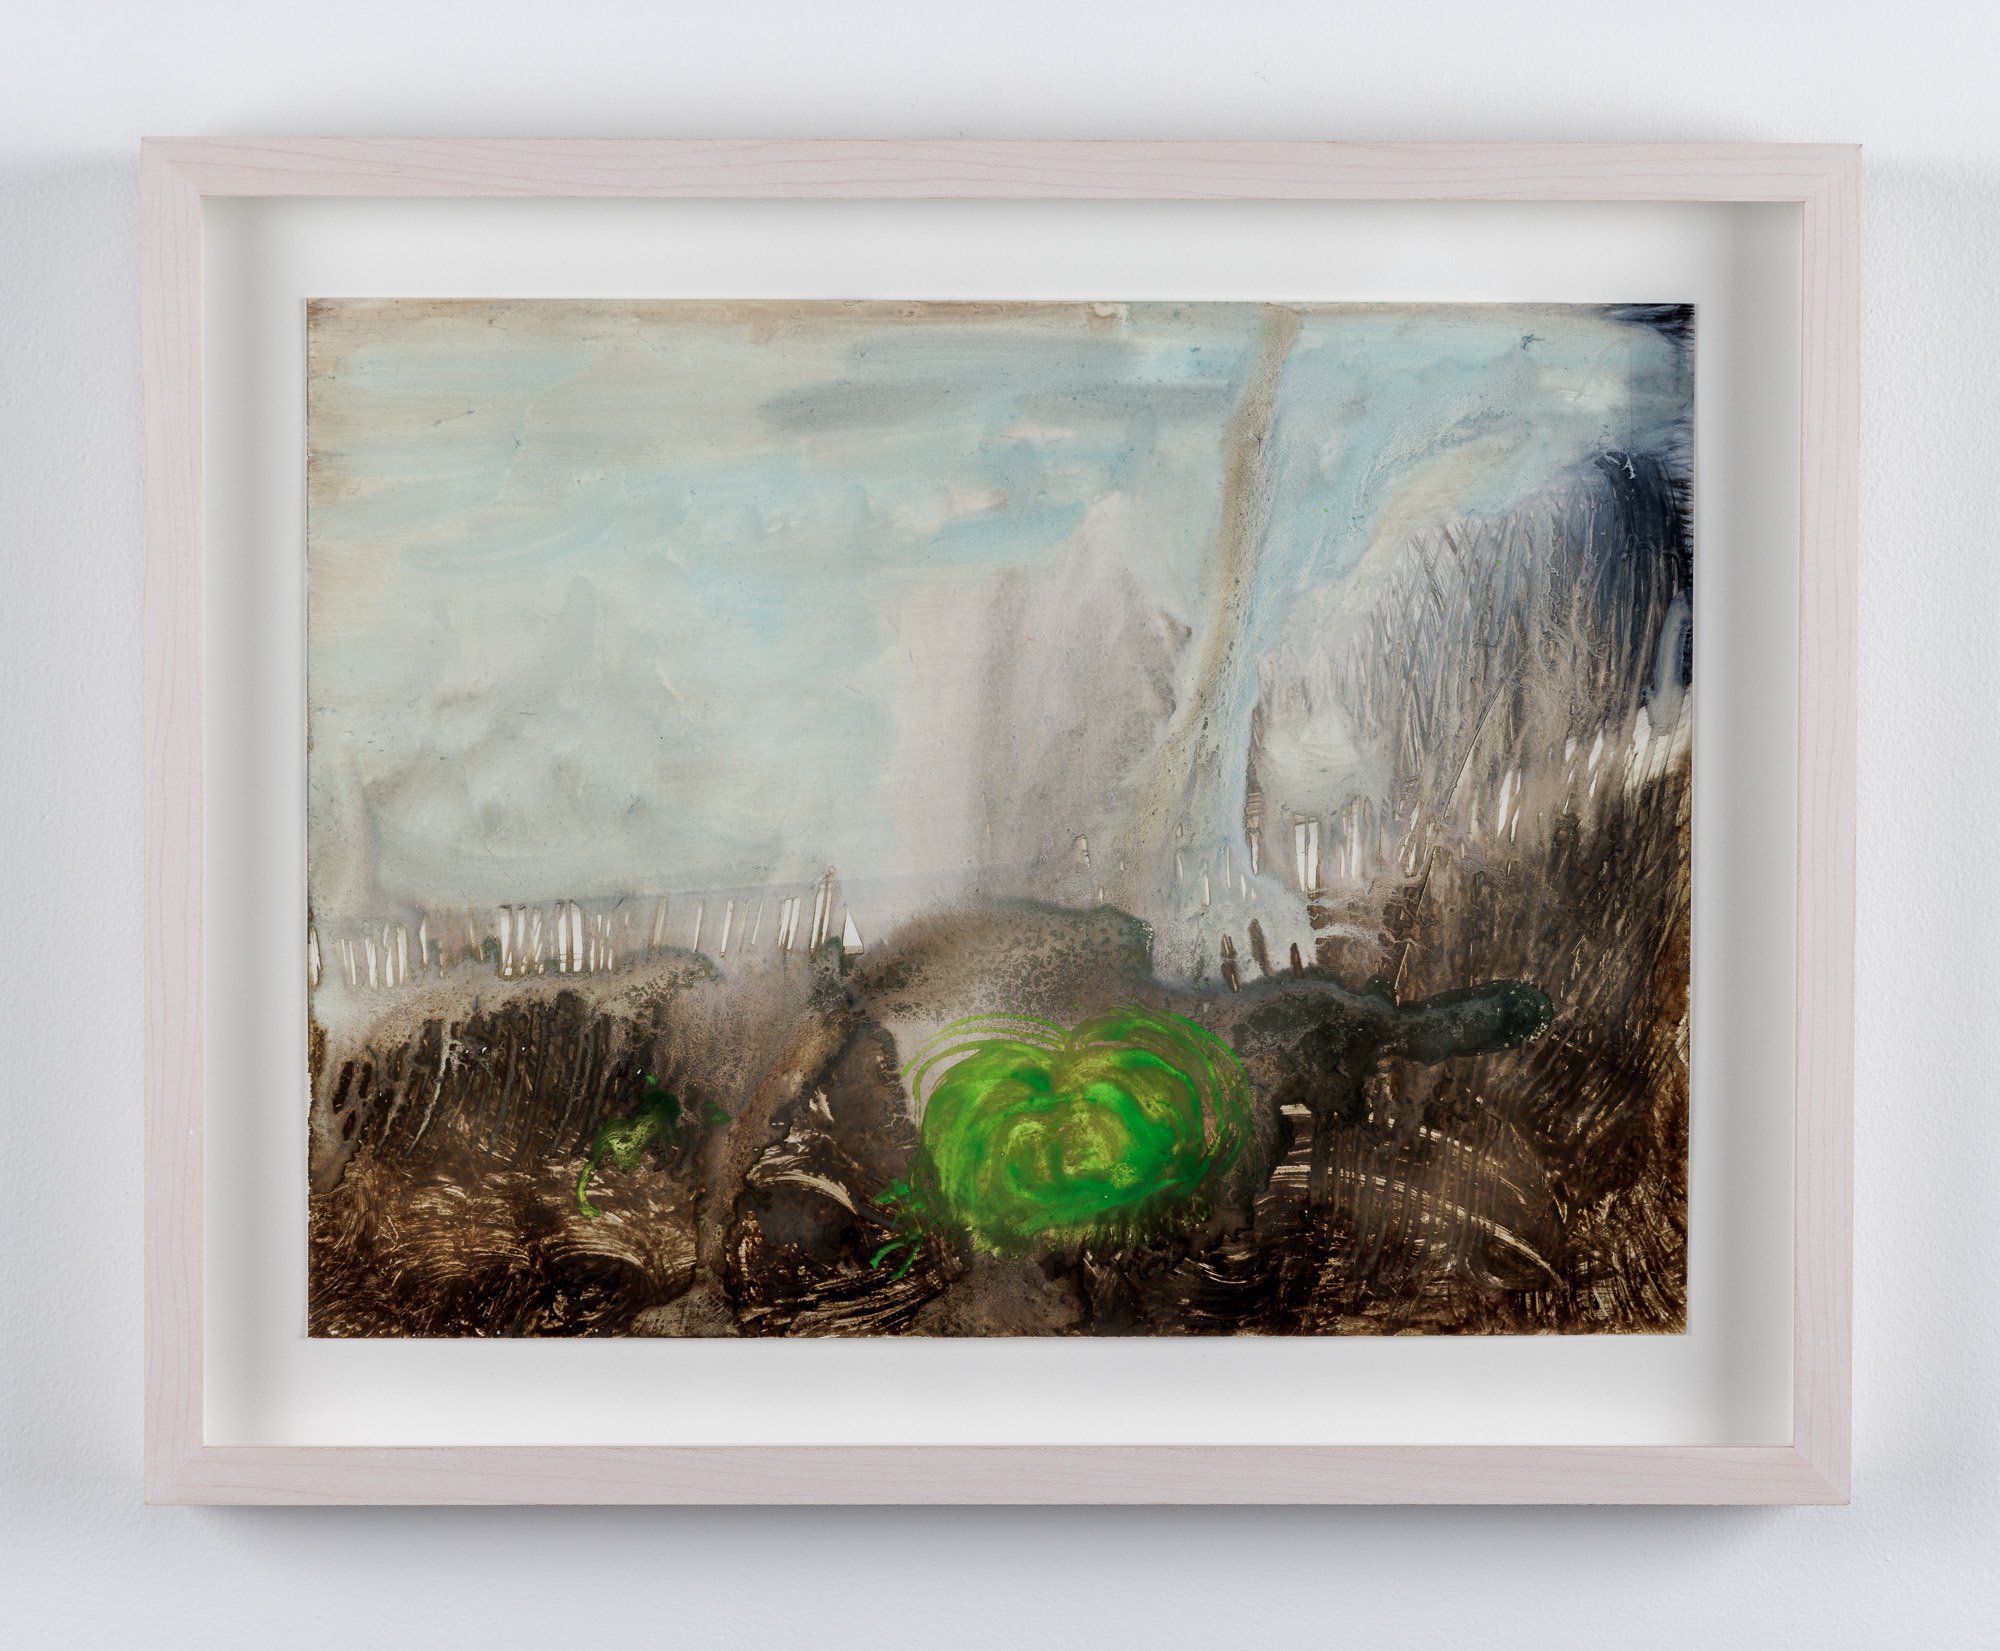  Laura Hunt,  Untitled (stormy landscape with green) , 2021, watercolor on Yupo, framed, 11.75 x 14.75 inches. 